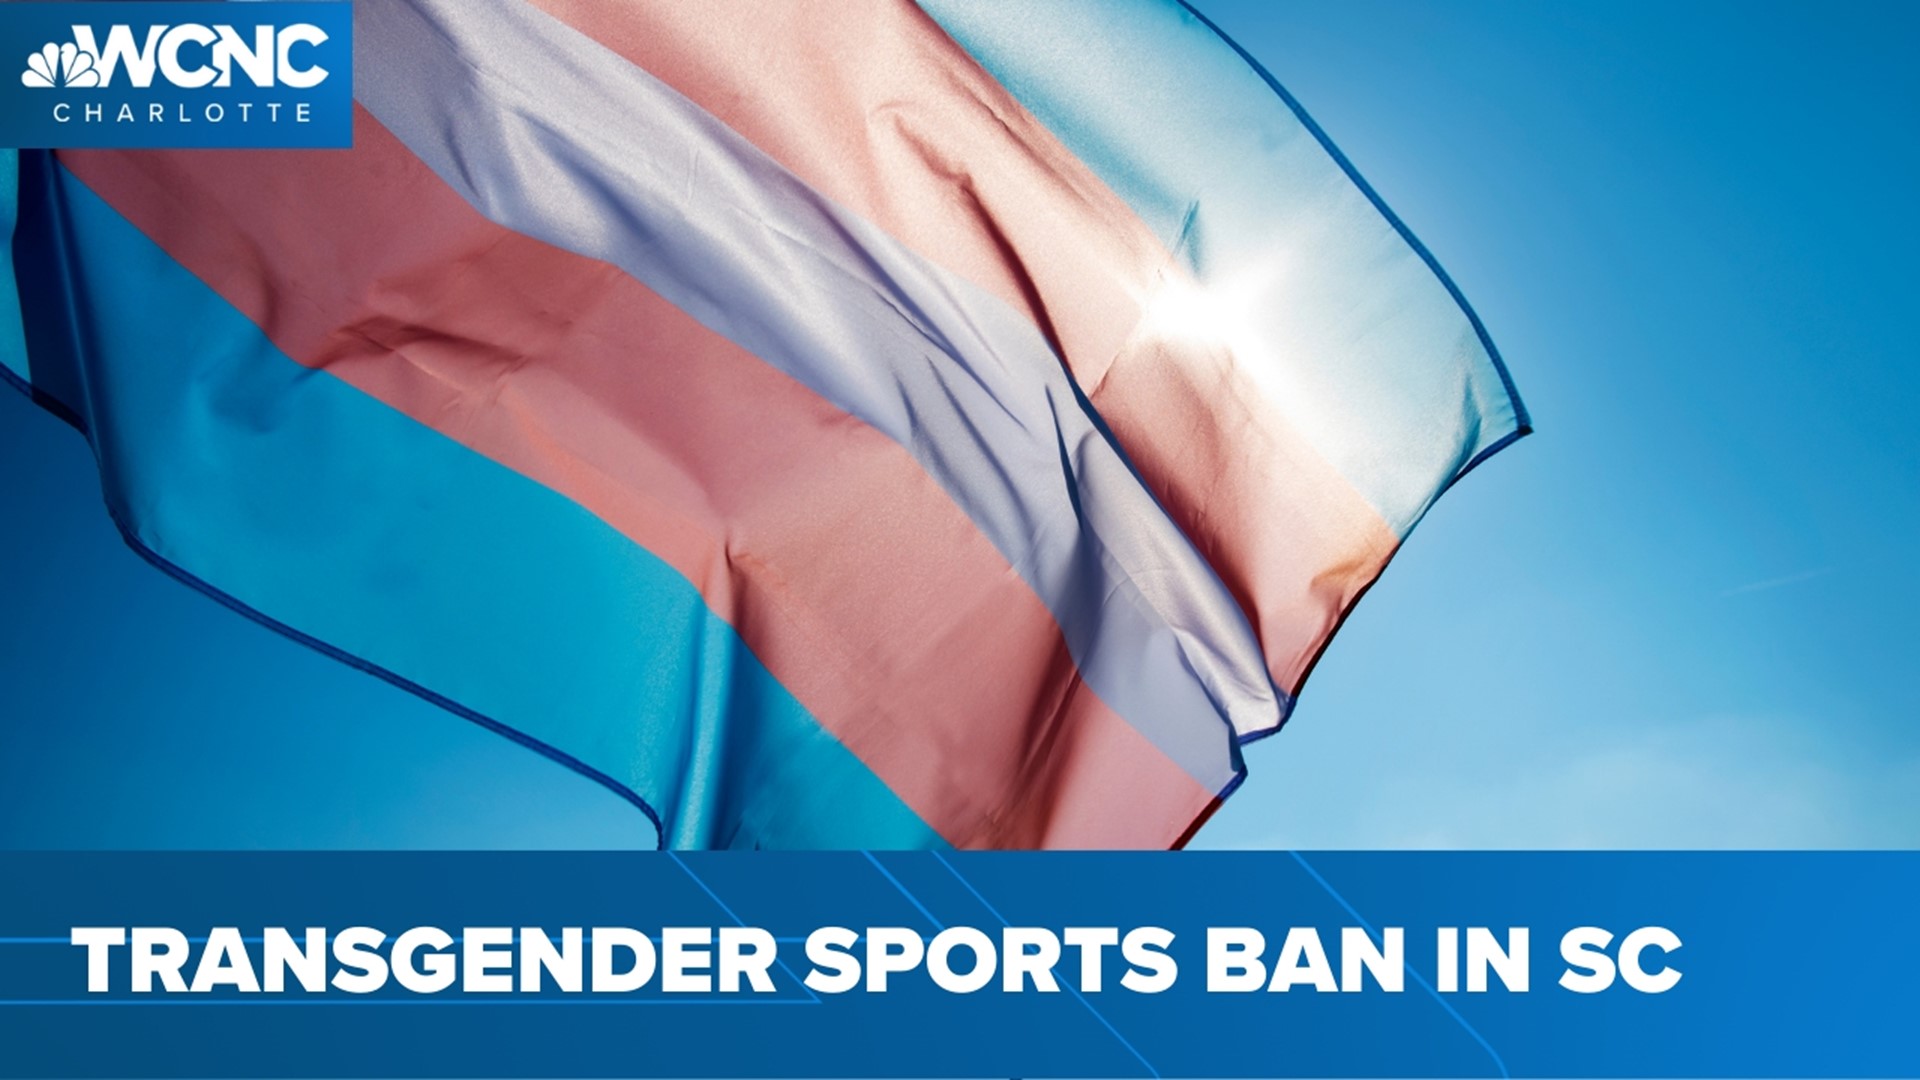 The bill bans transgender from competing in women's high school and college sports.